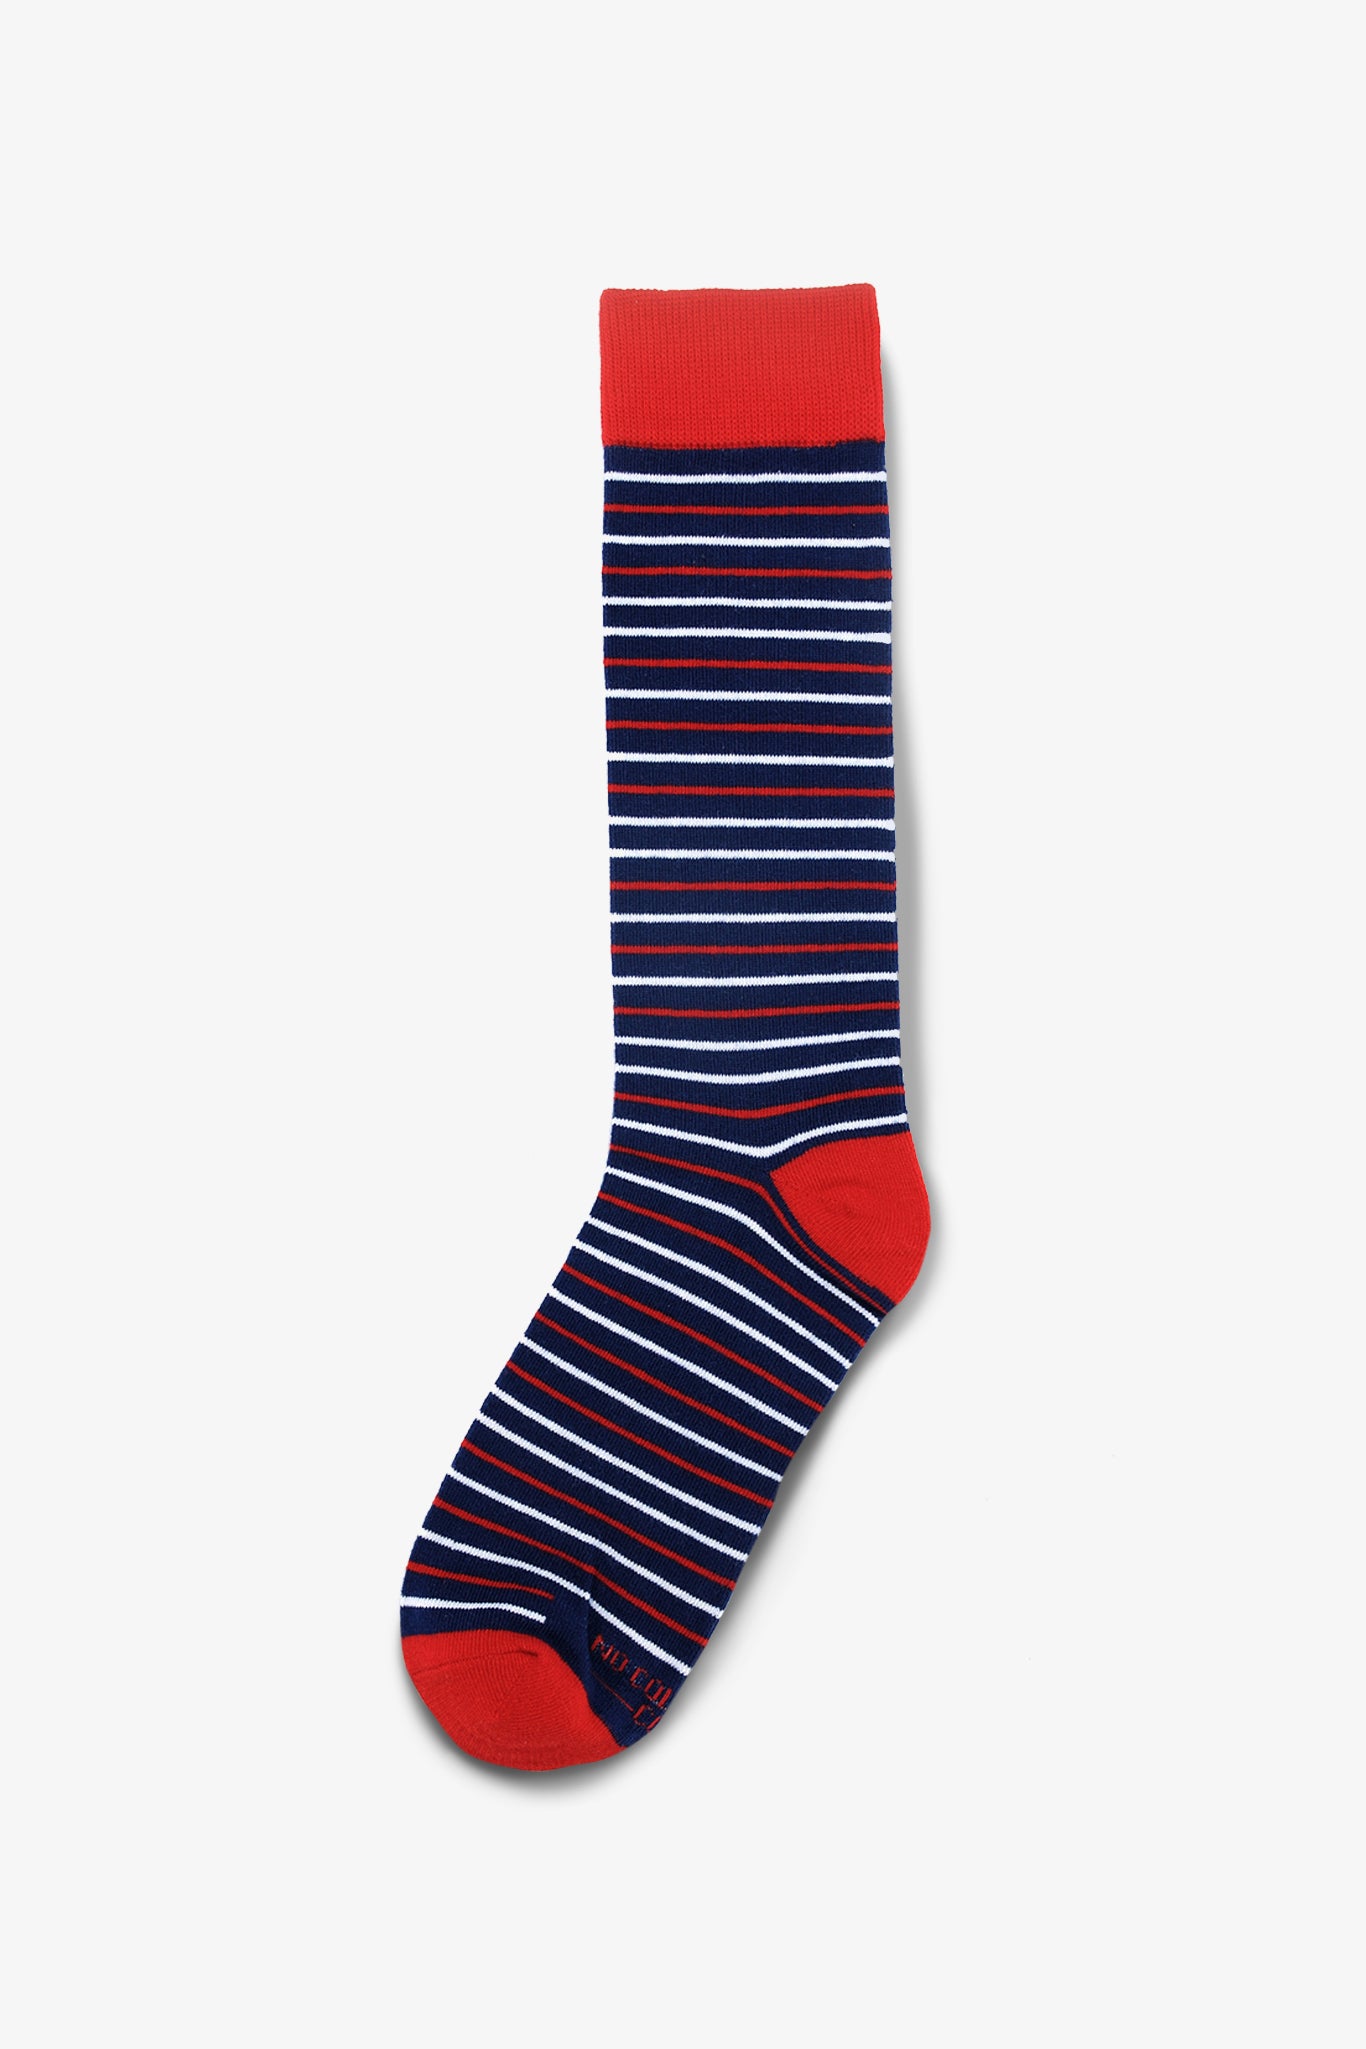 Navy Red and White Striped Groomsmen Socks by No Cold Feet